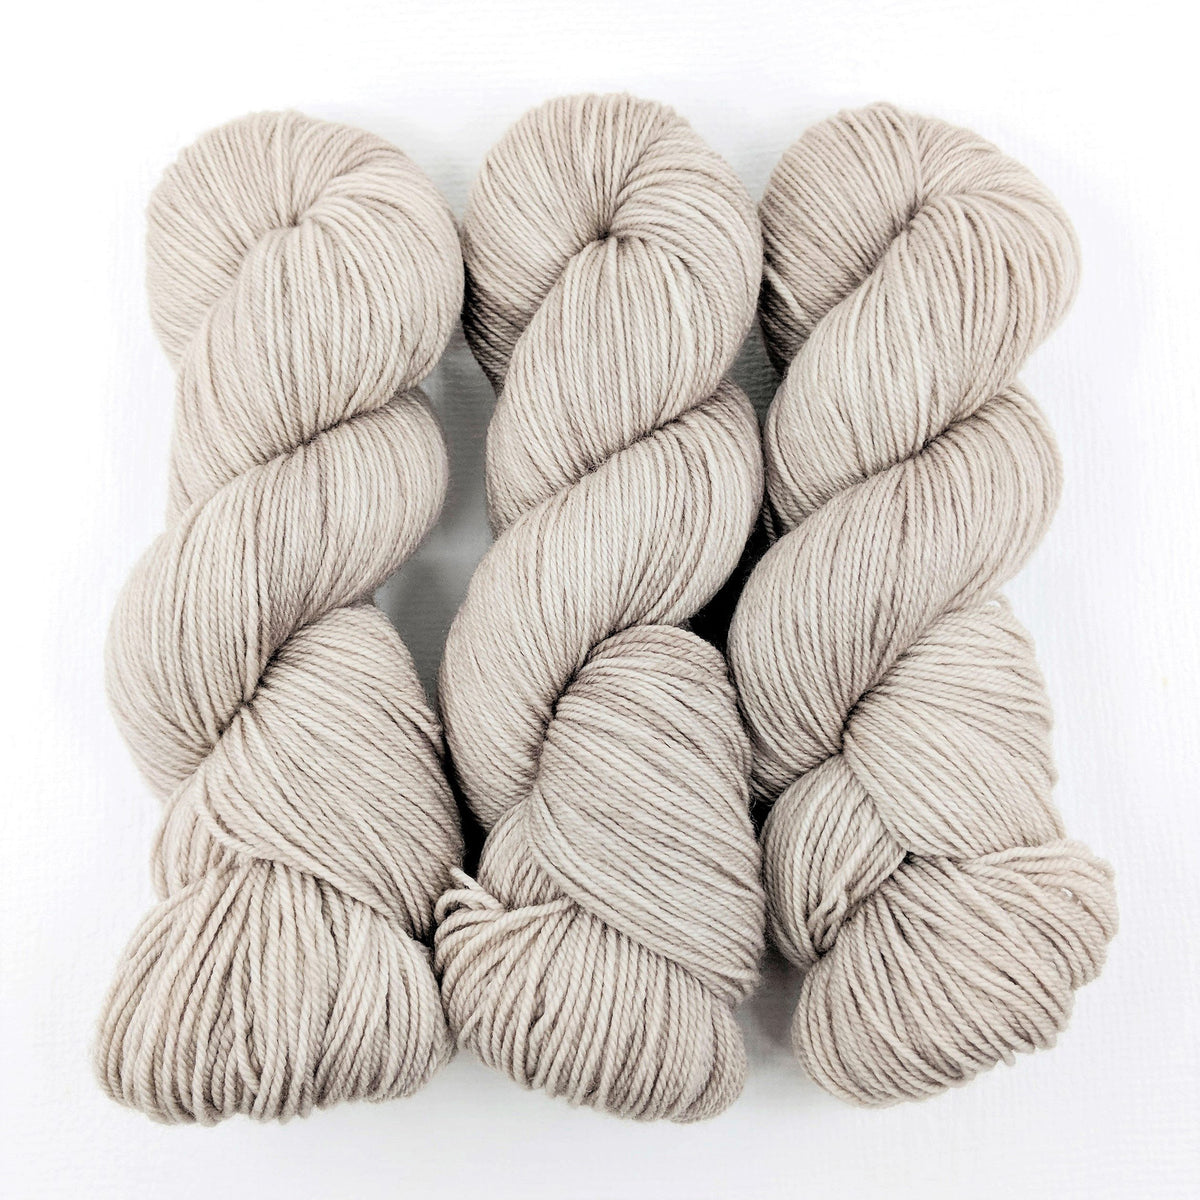 The Softer Side of Linen in Fingering / Sock Weight